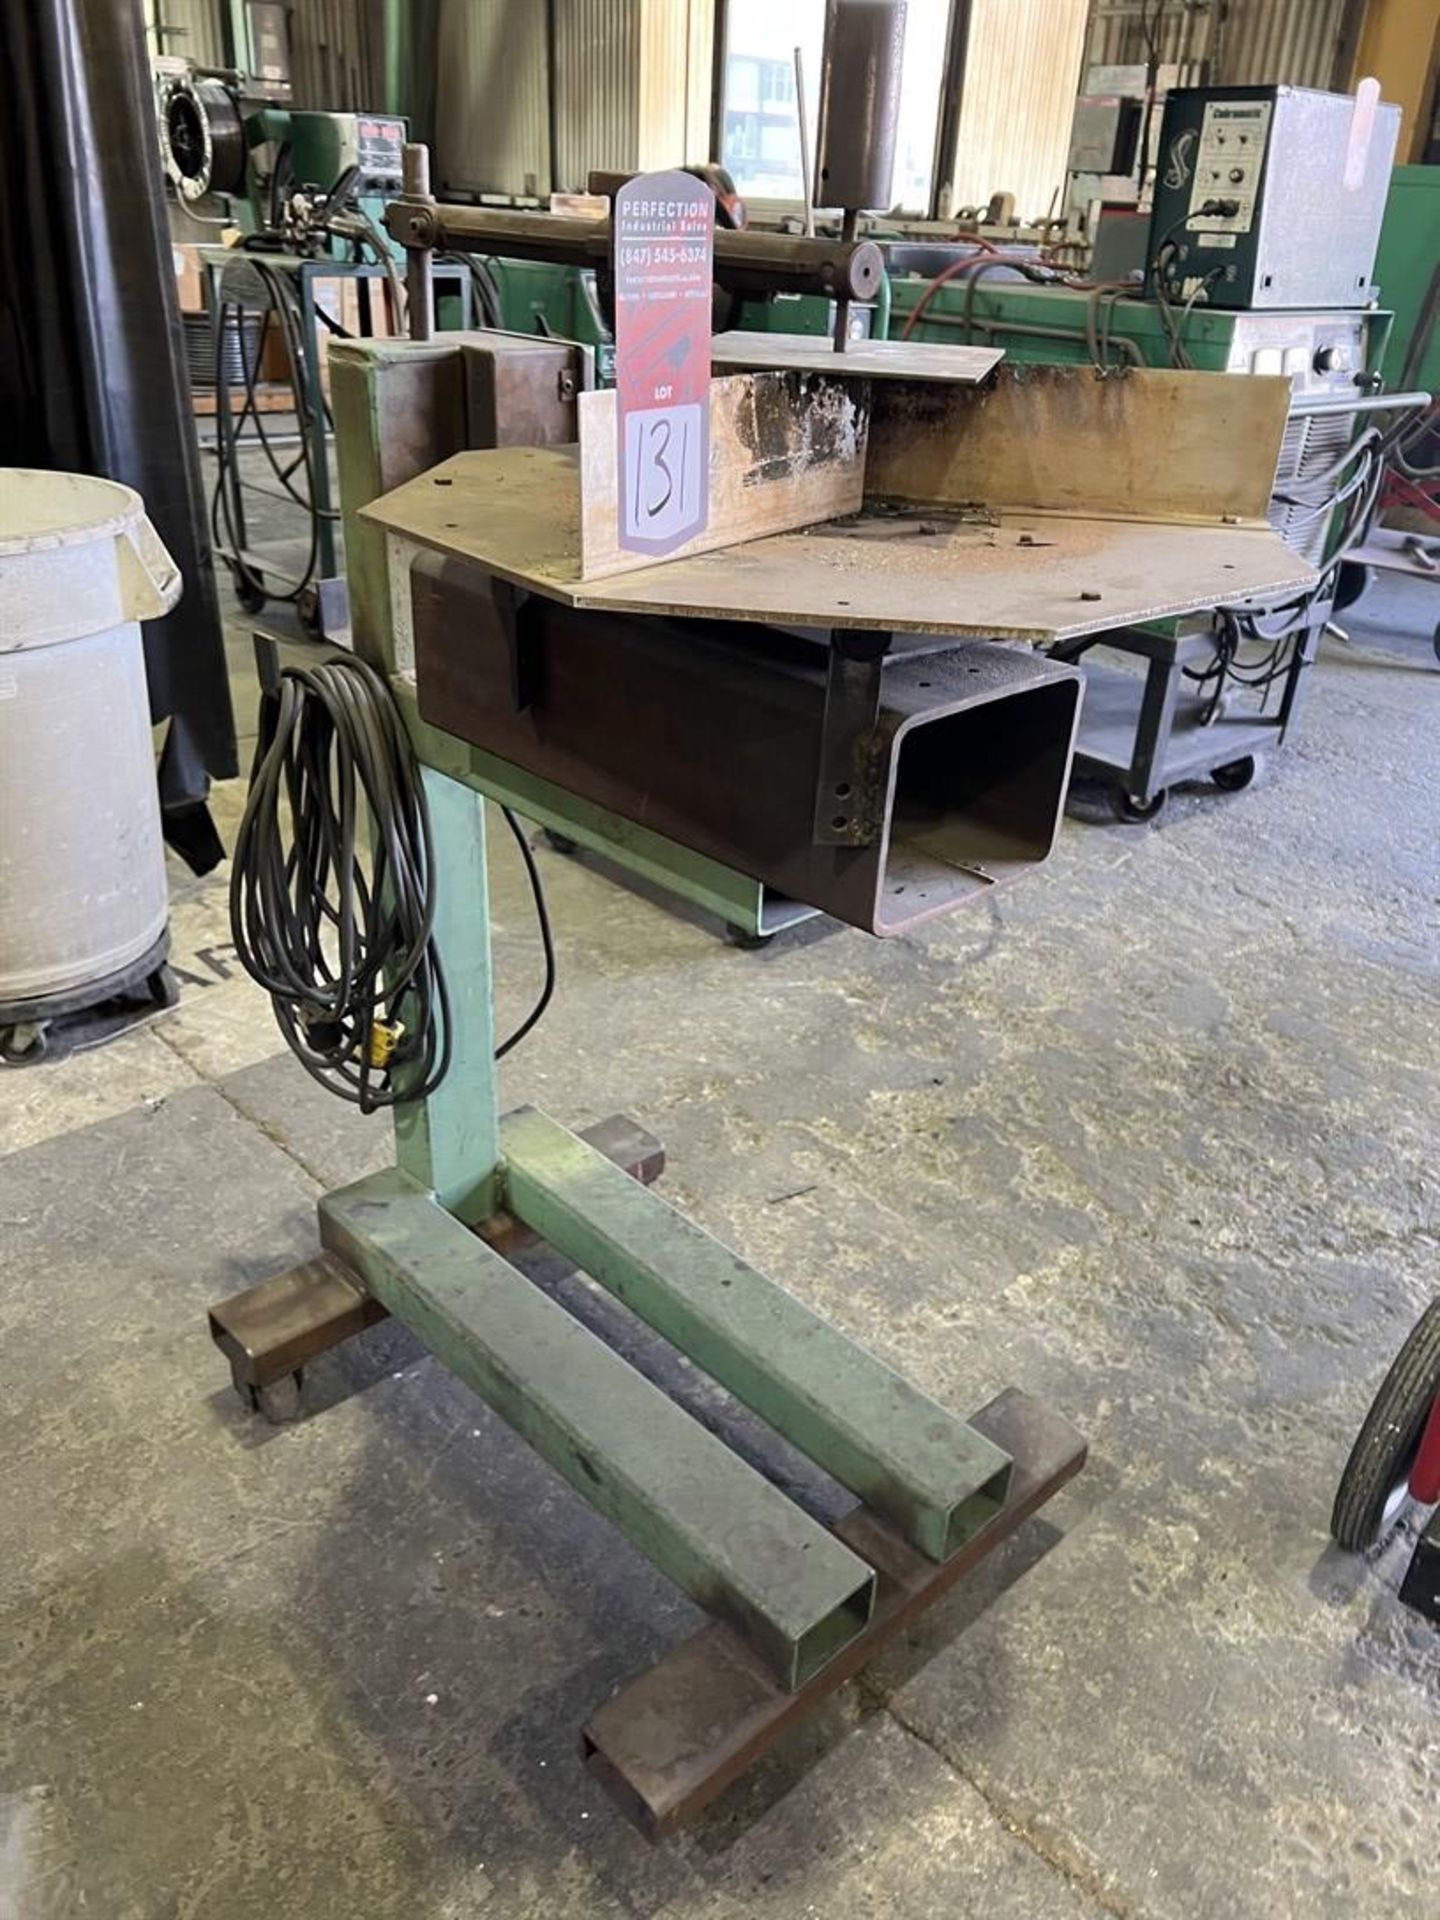 Shop Made Rotary Plasma Cutter, 24" Table, Speed Control (Building 44) - Image 2 of 3